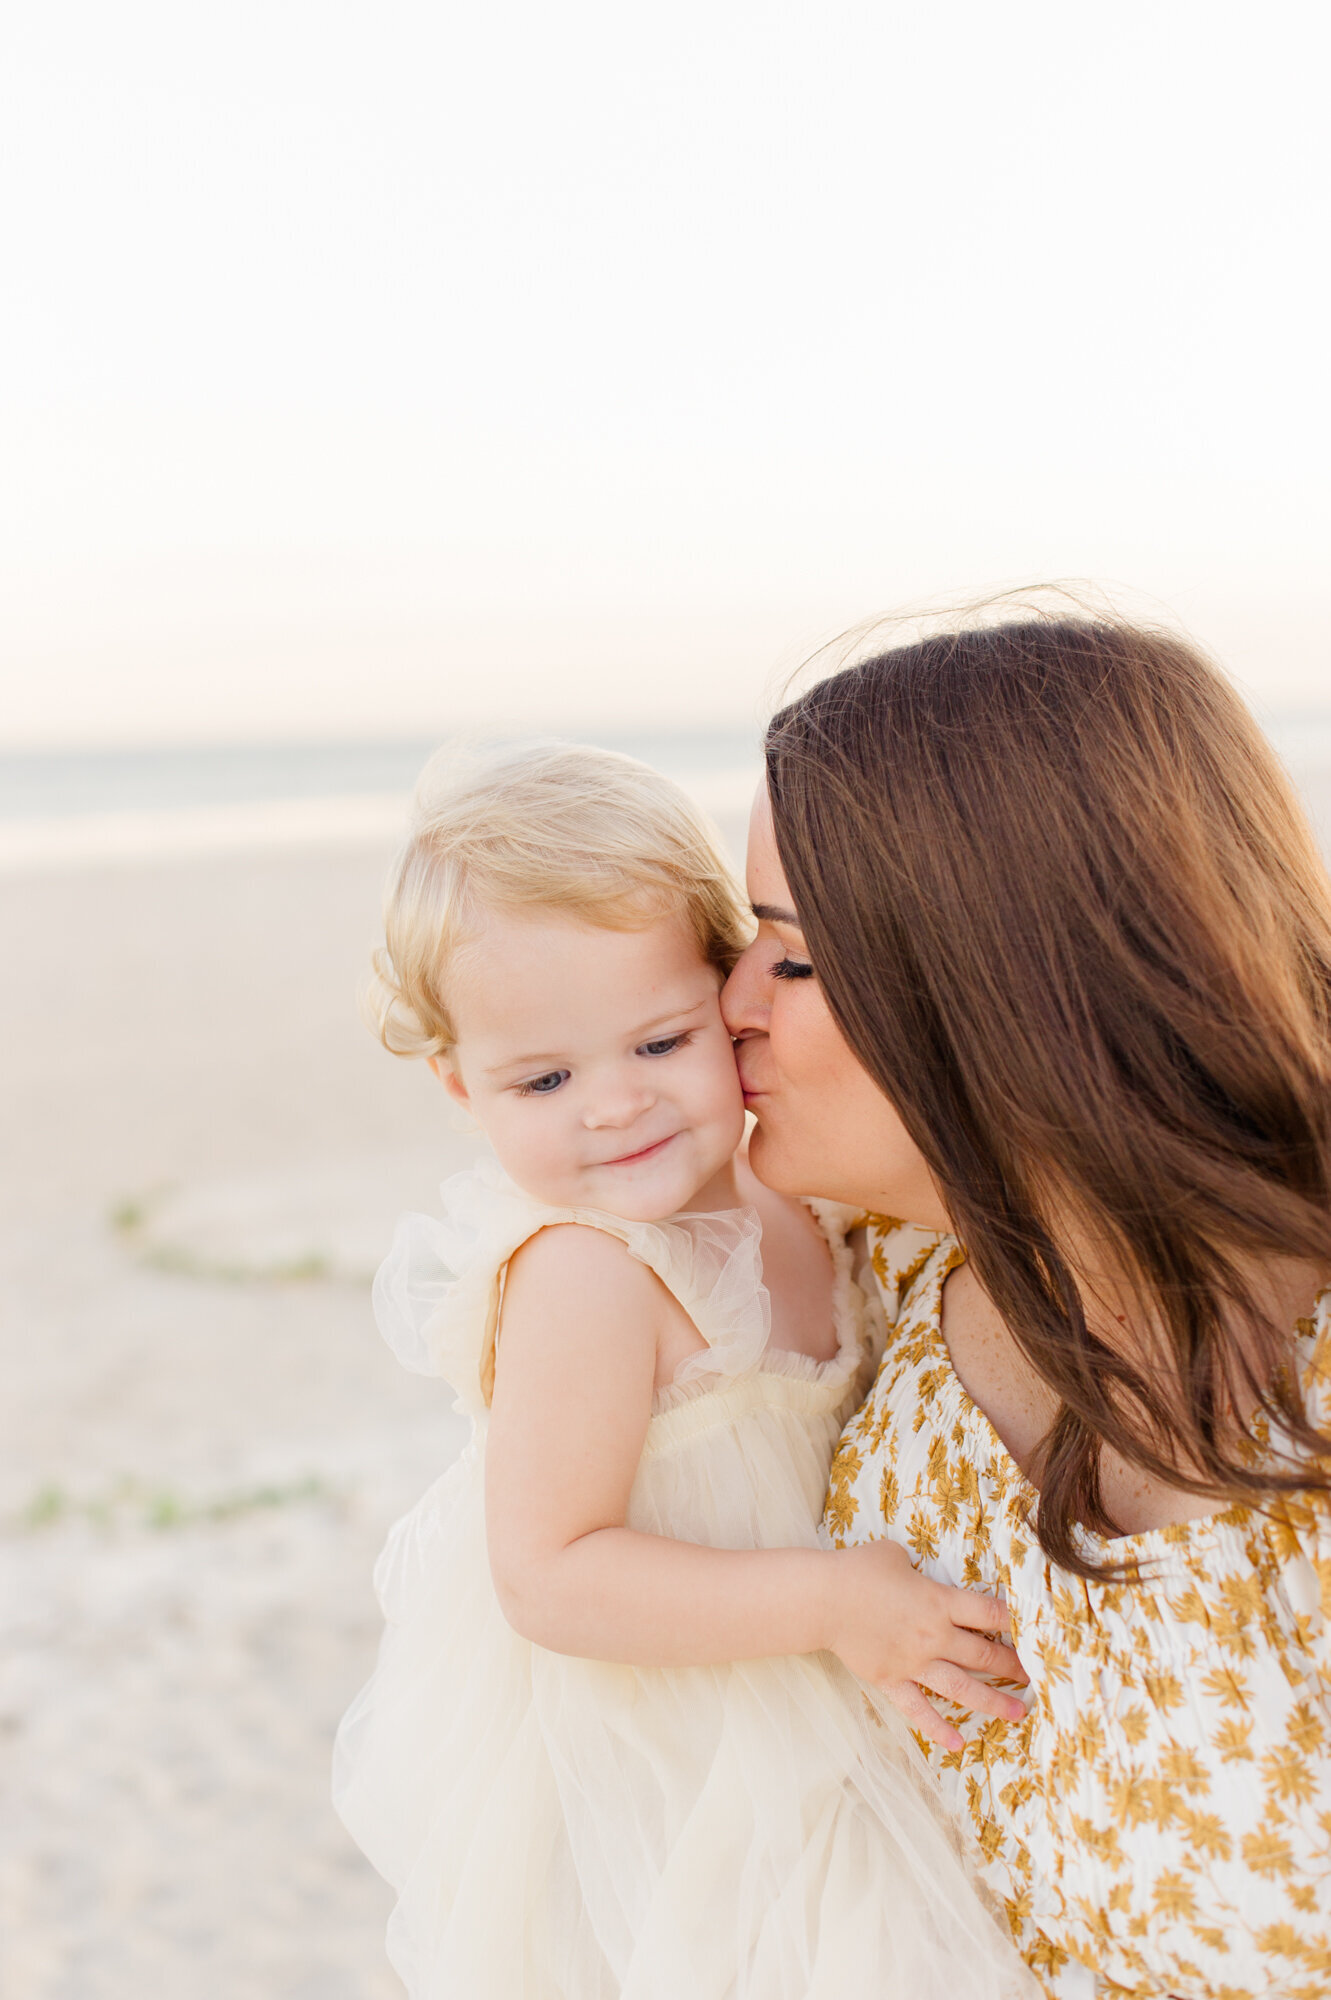 Melbourne Fl mom kisses daughter on the cheek at the beach during their family photos